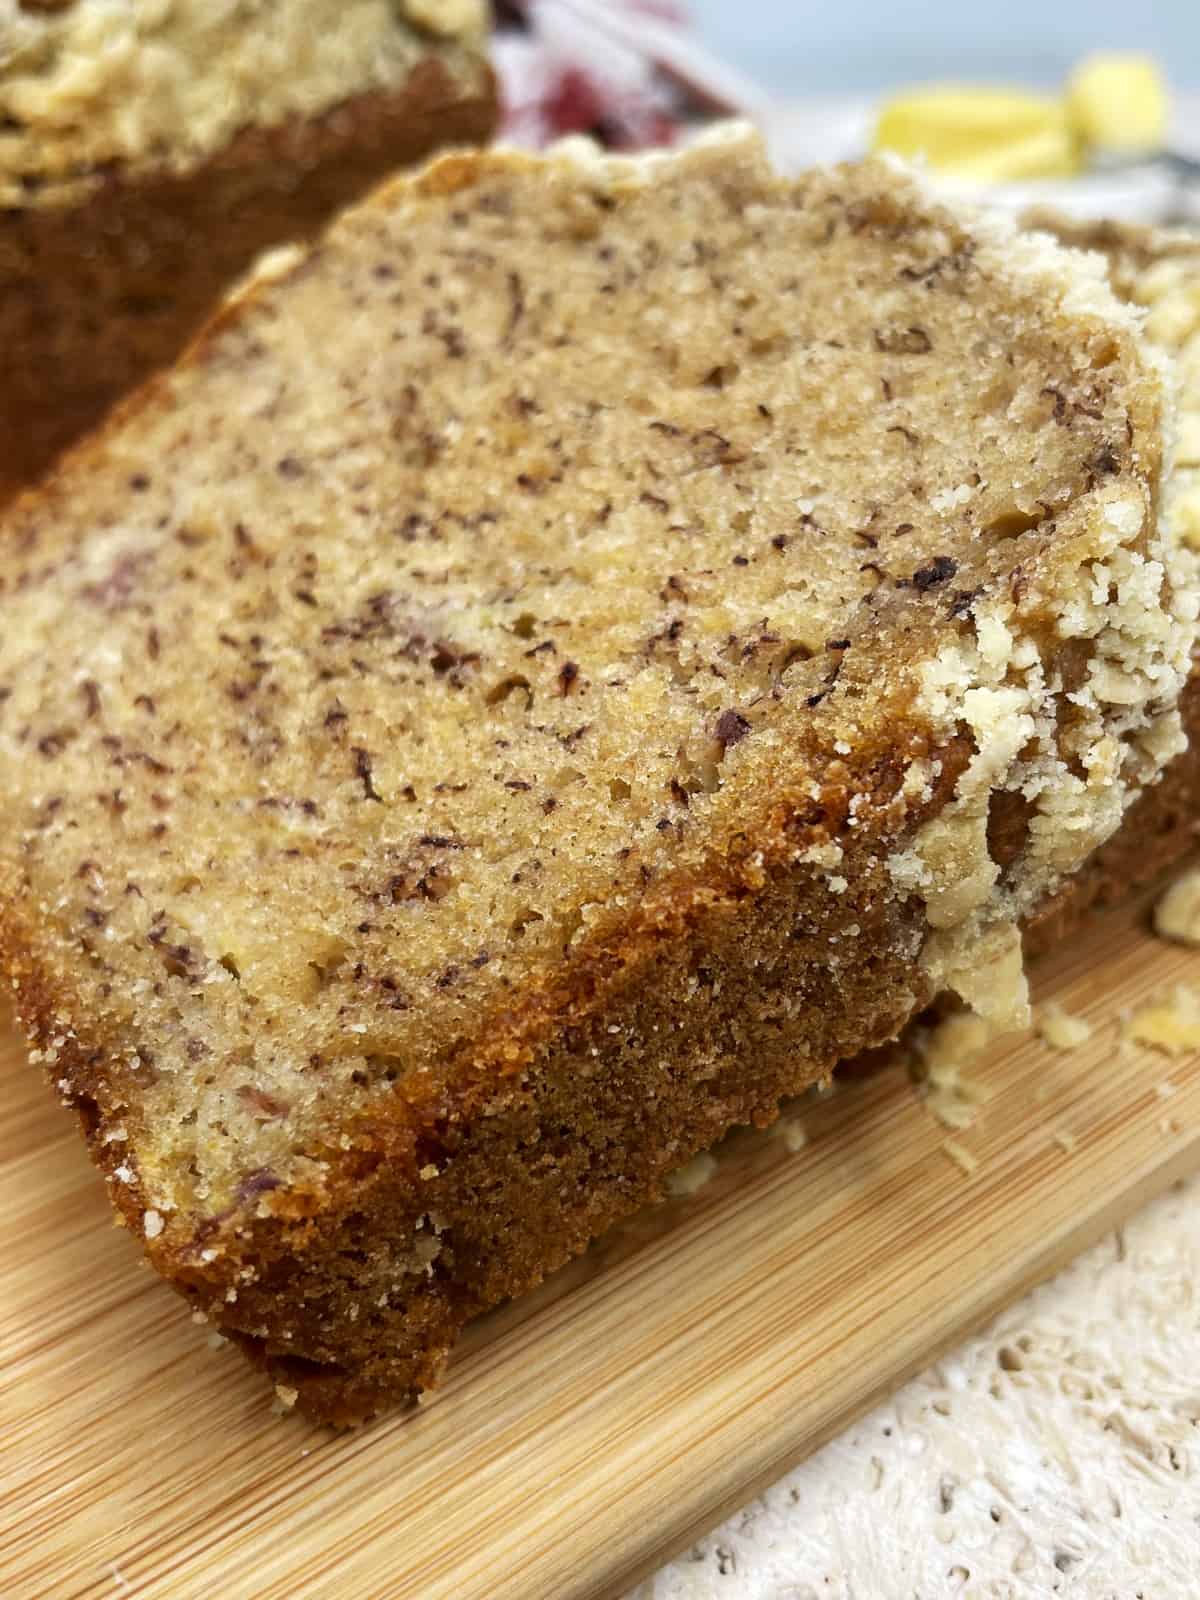 Thickly sliced banana bread topped with streusel: Close up